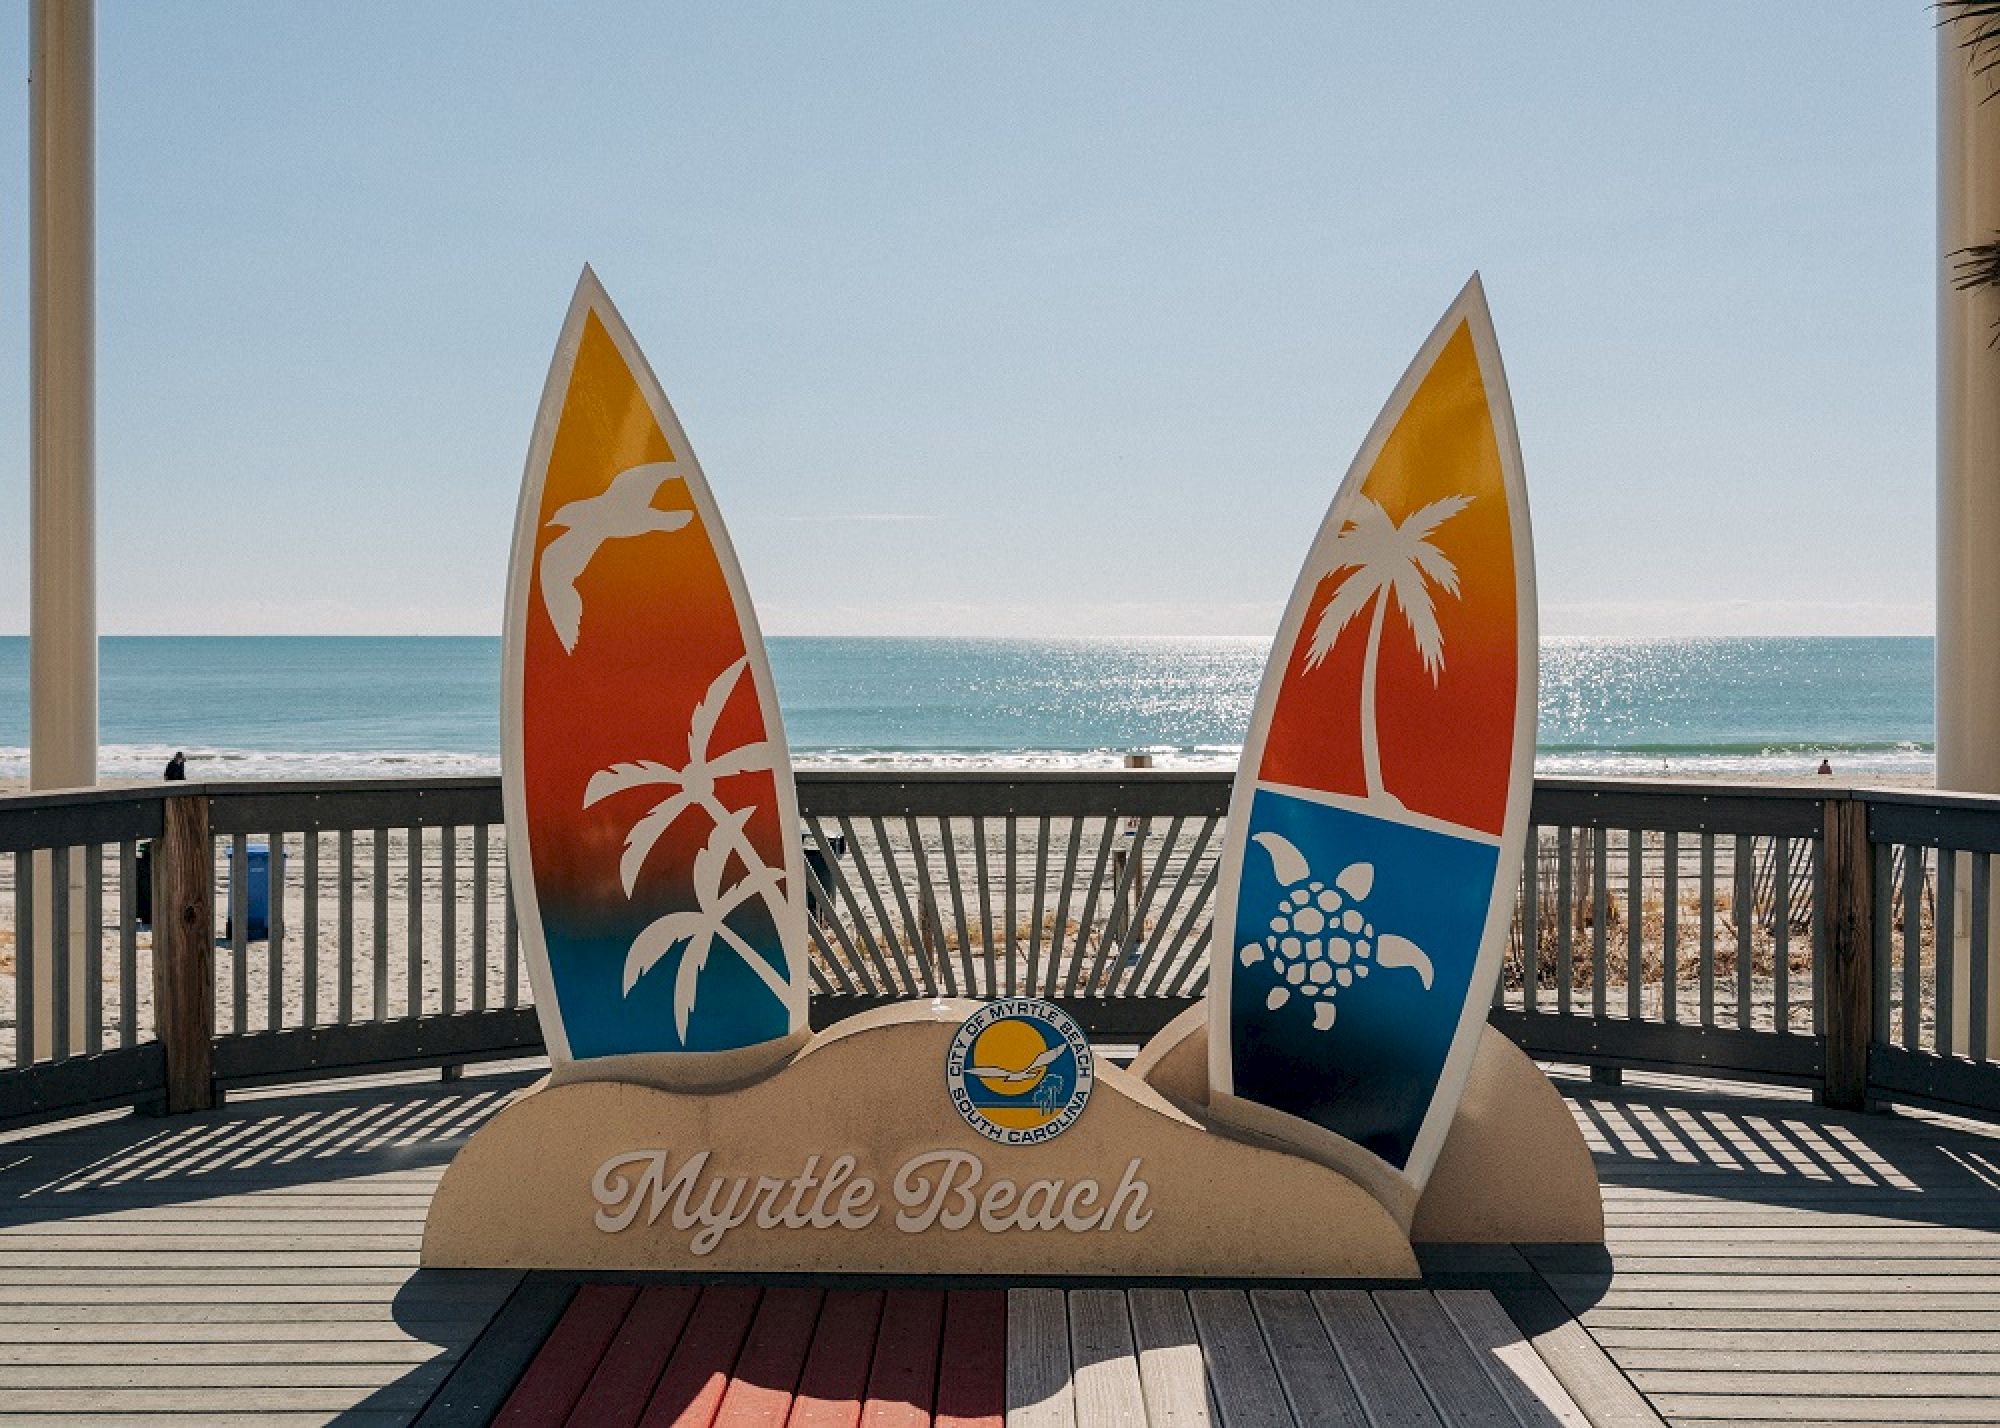 The image shows a Myrtle Beach sign in front of an ocean backdrop, featuring surfboard designs with tropical motifs on a wooden deck.